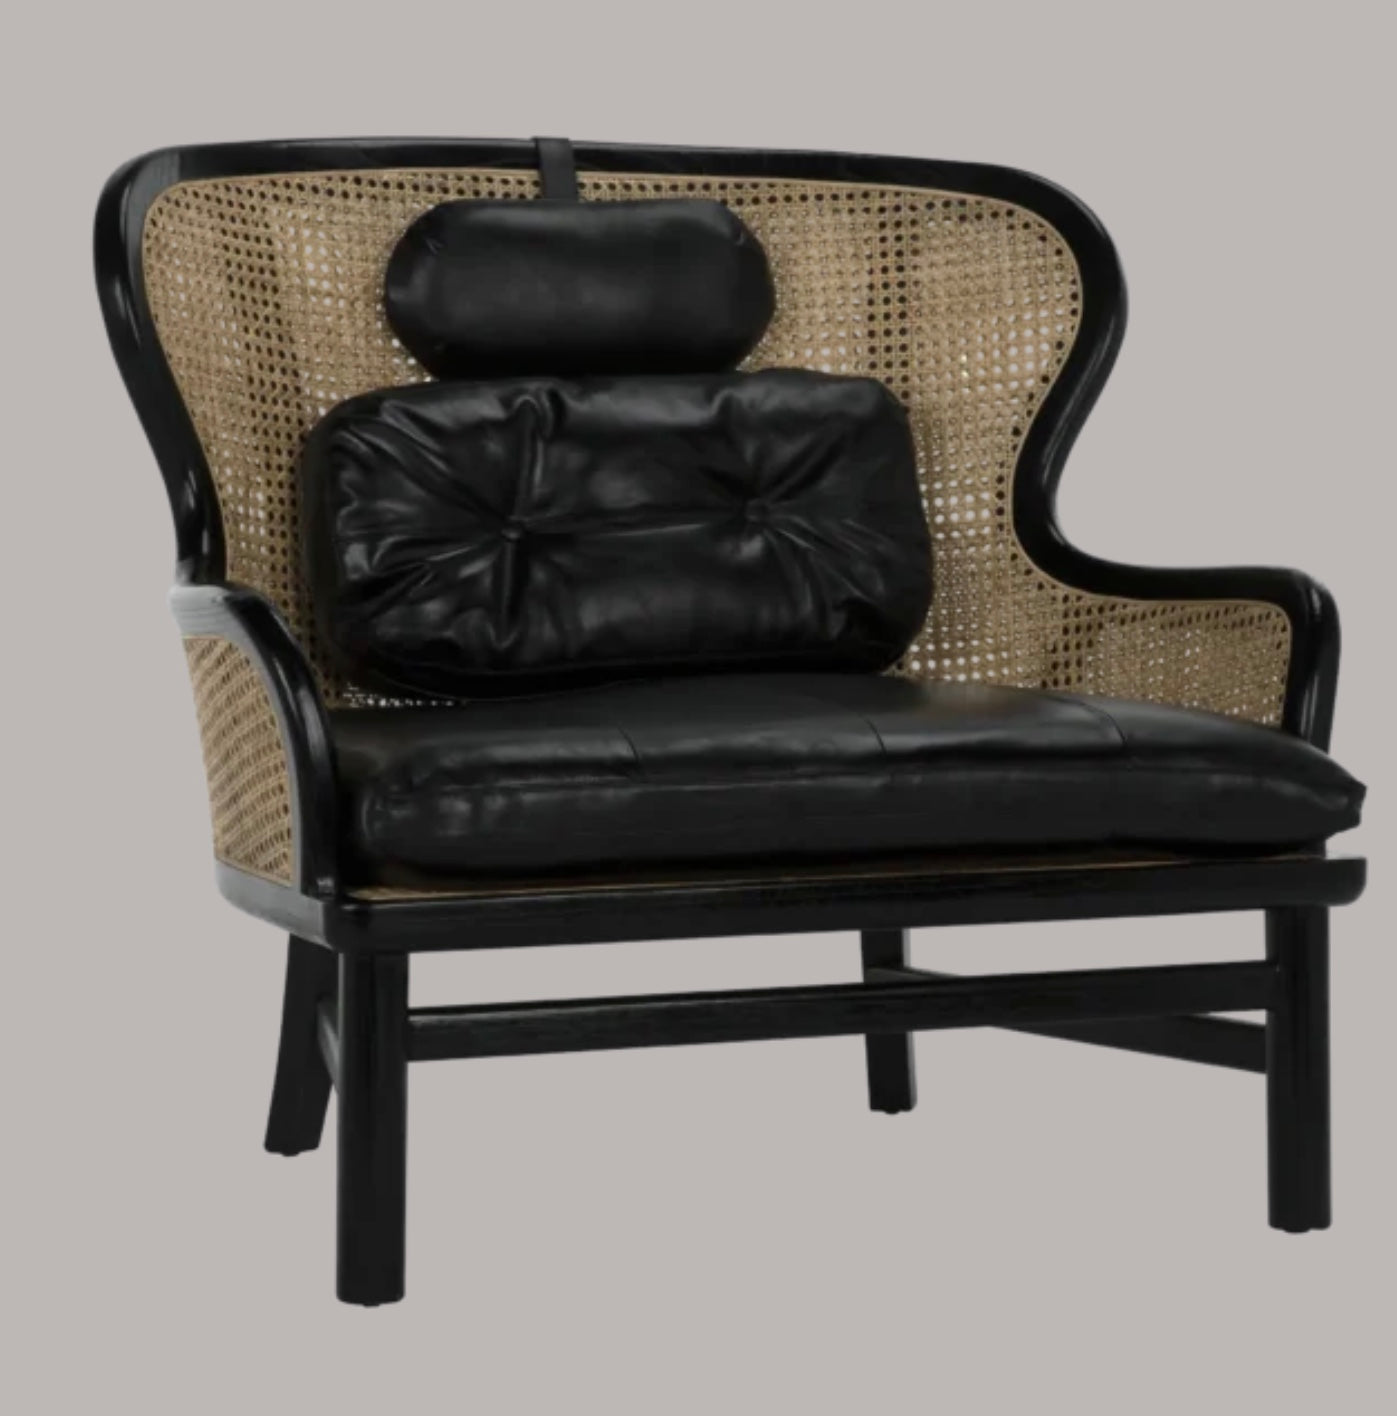 Wicker & leather chair